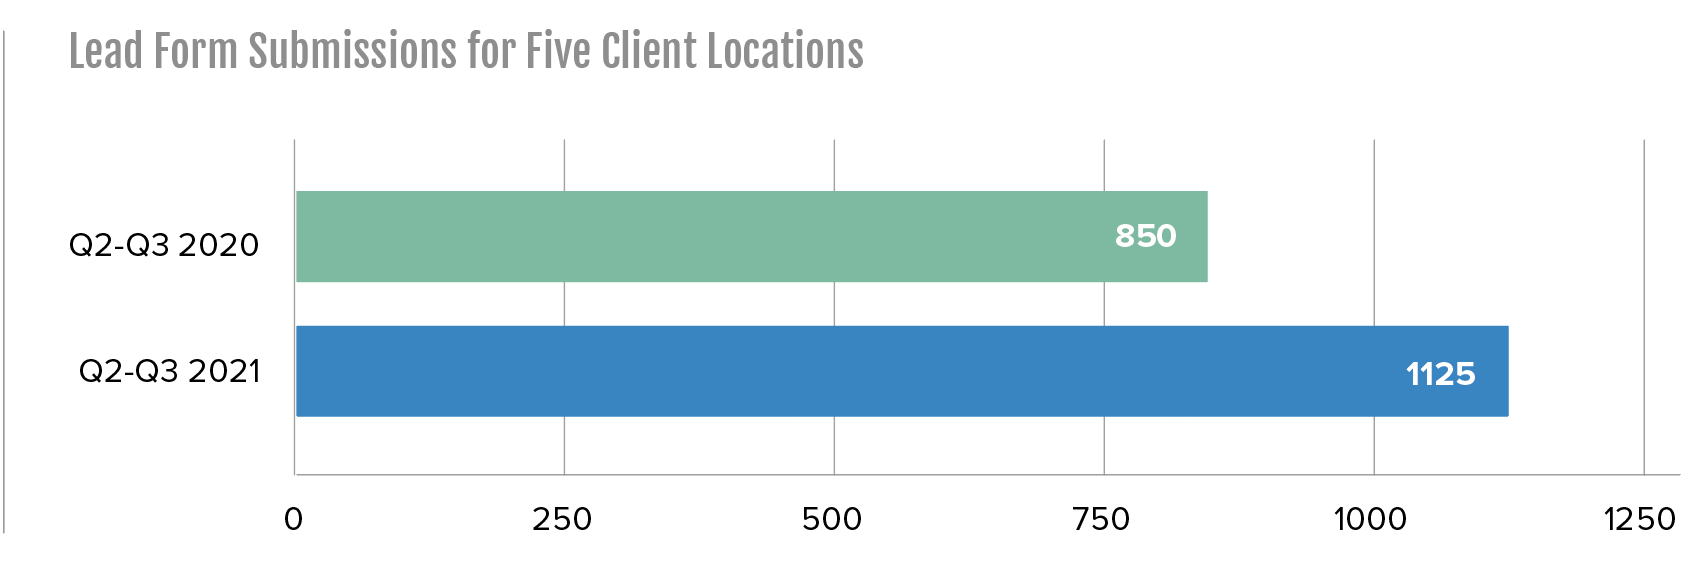 lead form submissions for 5 client locations